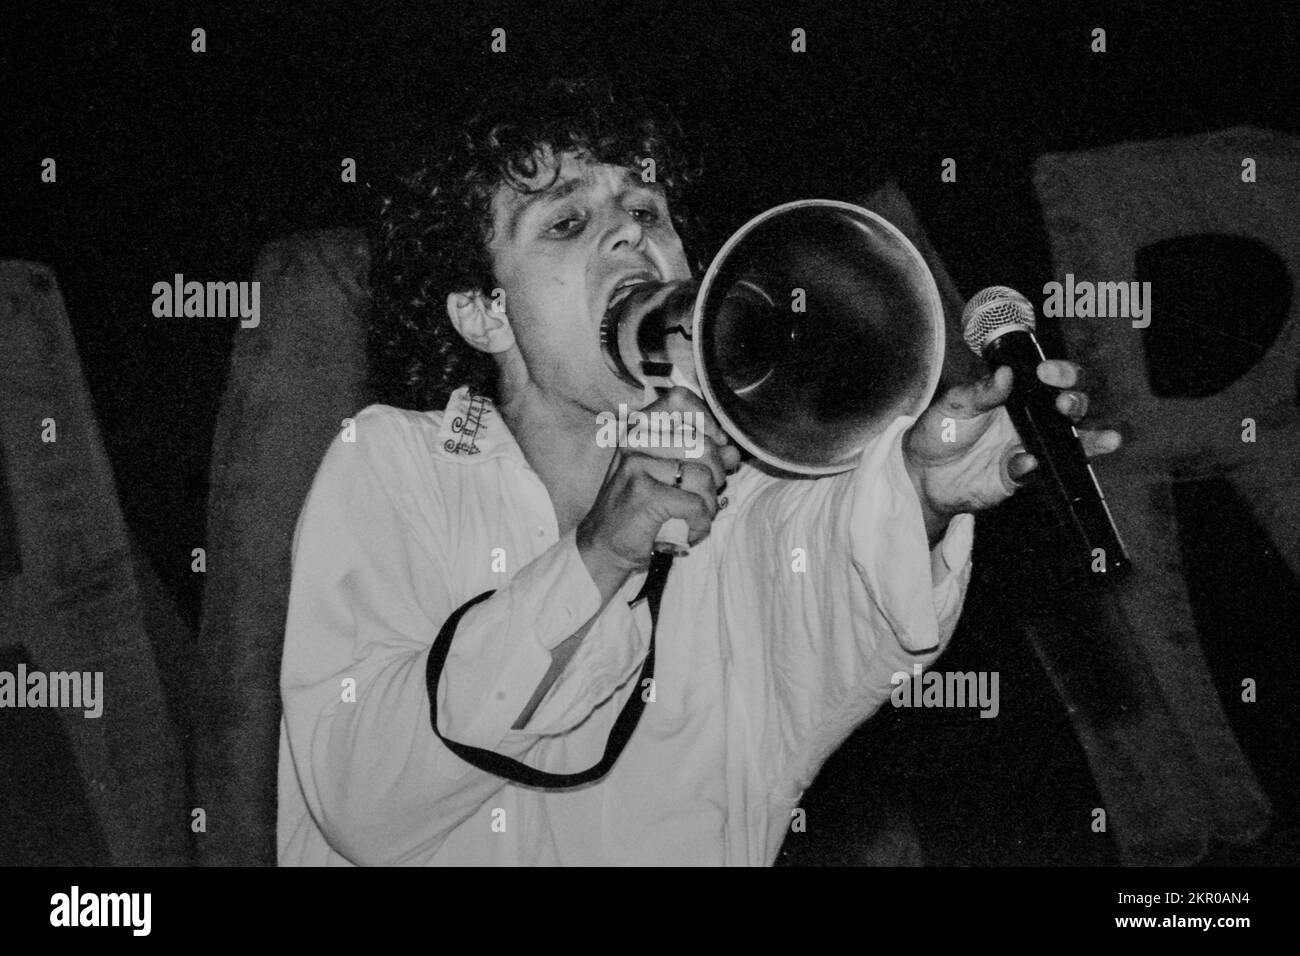 James live in concert in the 1990s - Tim Booth, singer of James, the 1990s phenomenon, on stage at Tamaris Rock Festival in 1992, holding a megaphone Stock Photo